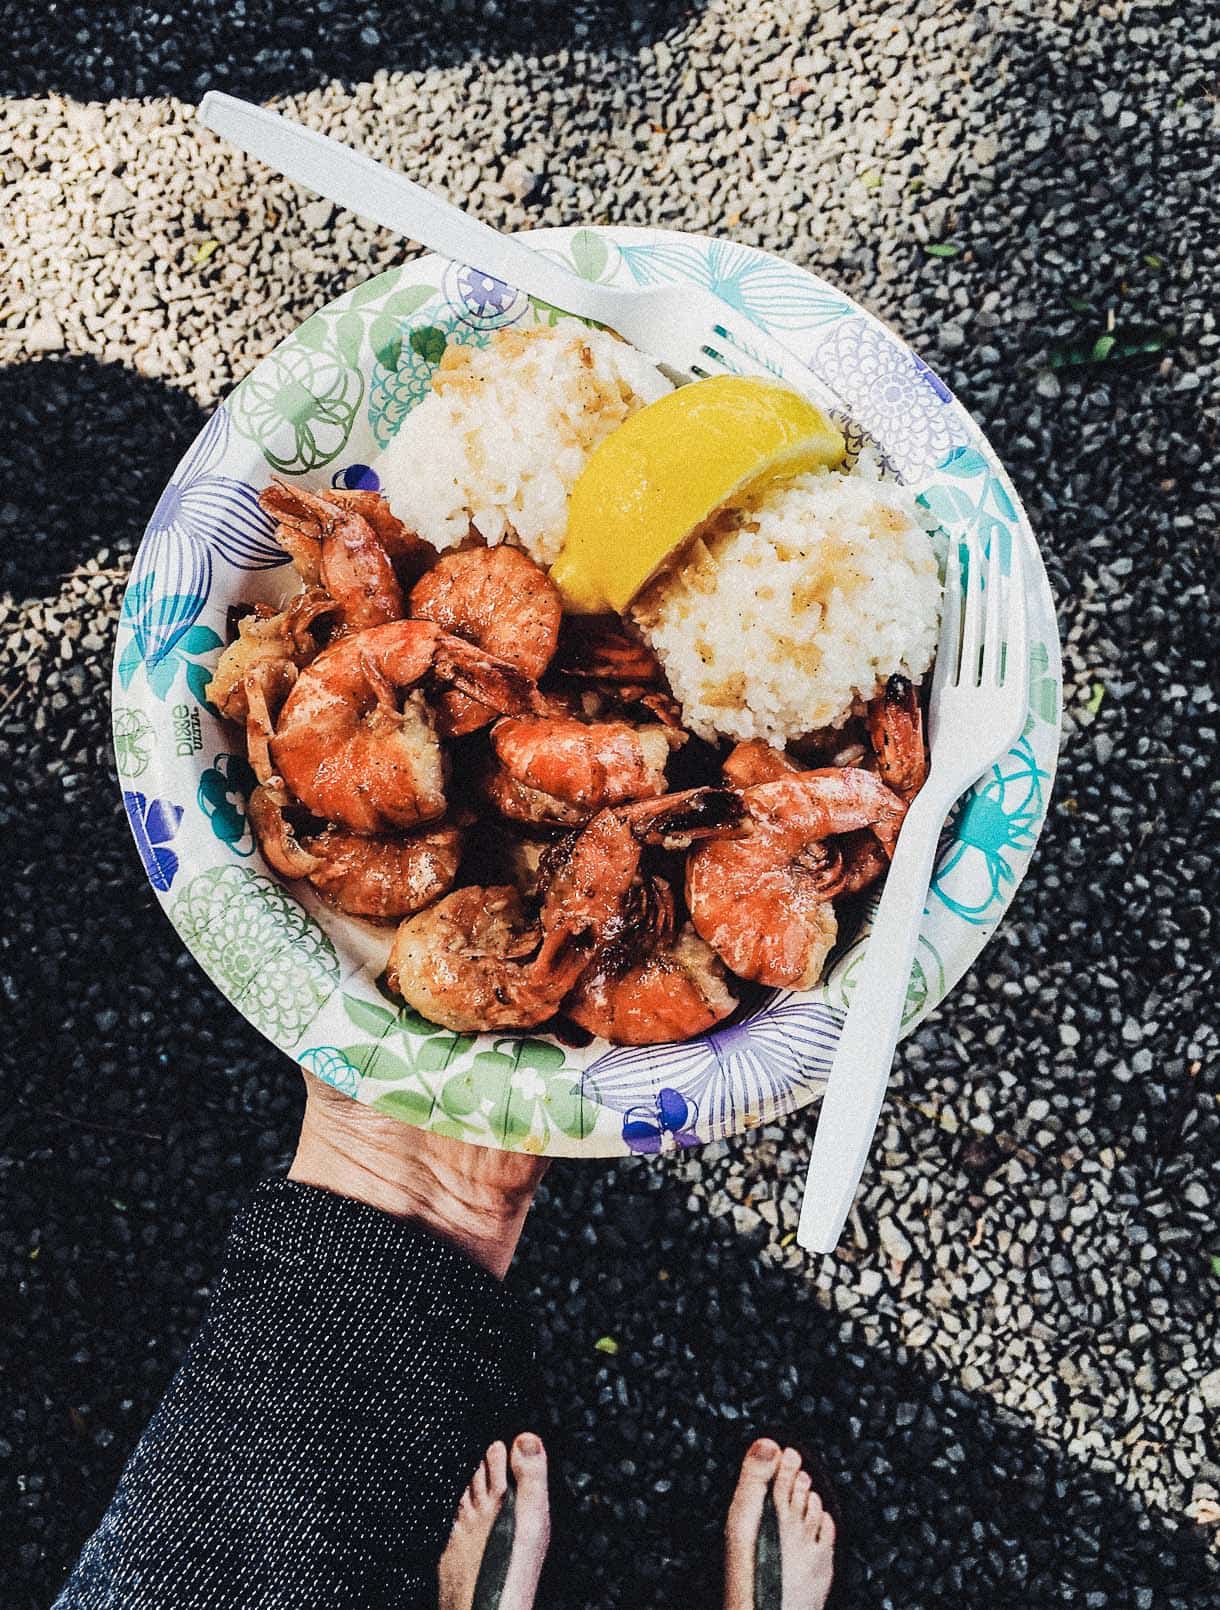 The best shrimp truck in Oahu is Giovanni's! The scampi is the way to go, with lots of garlic butter.